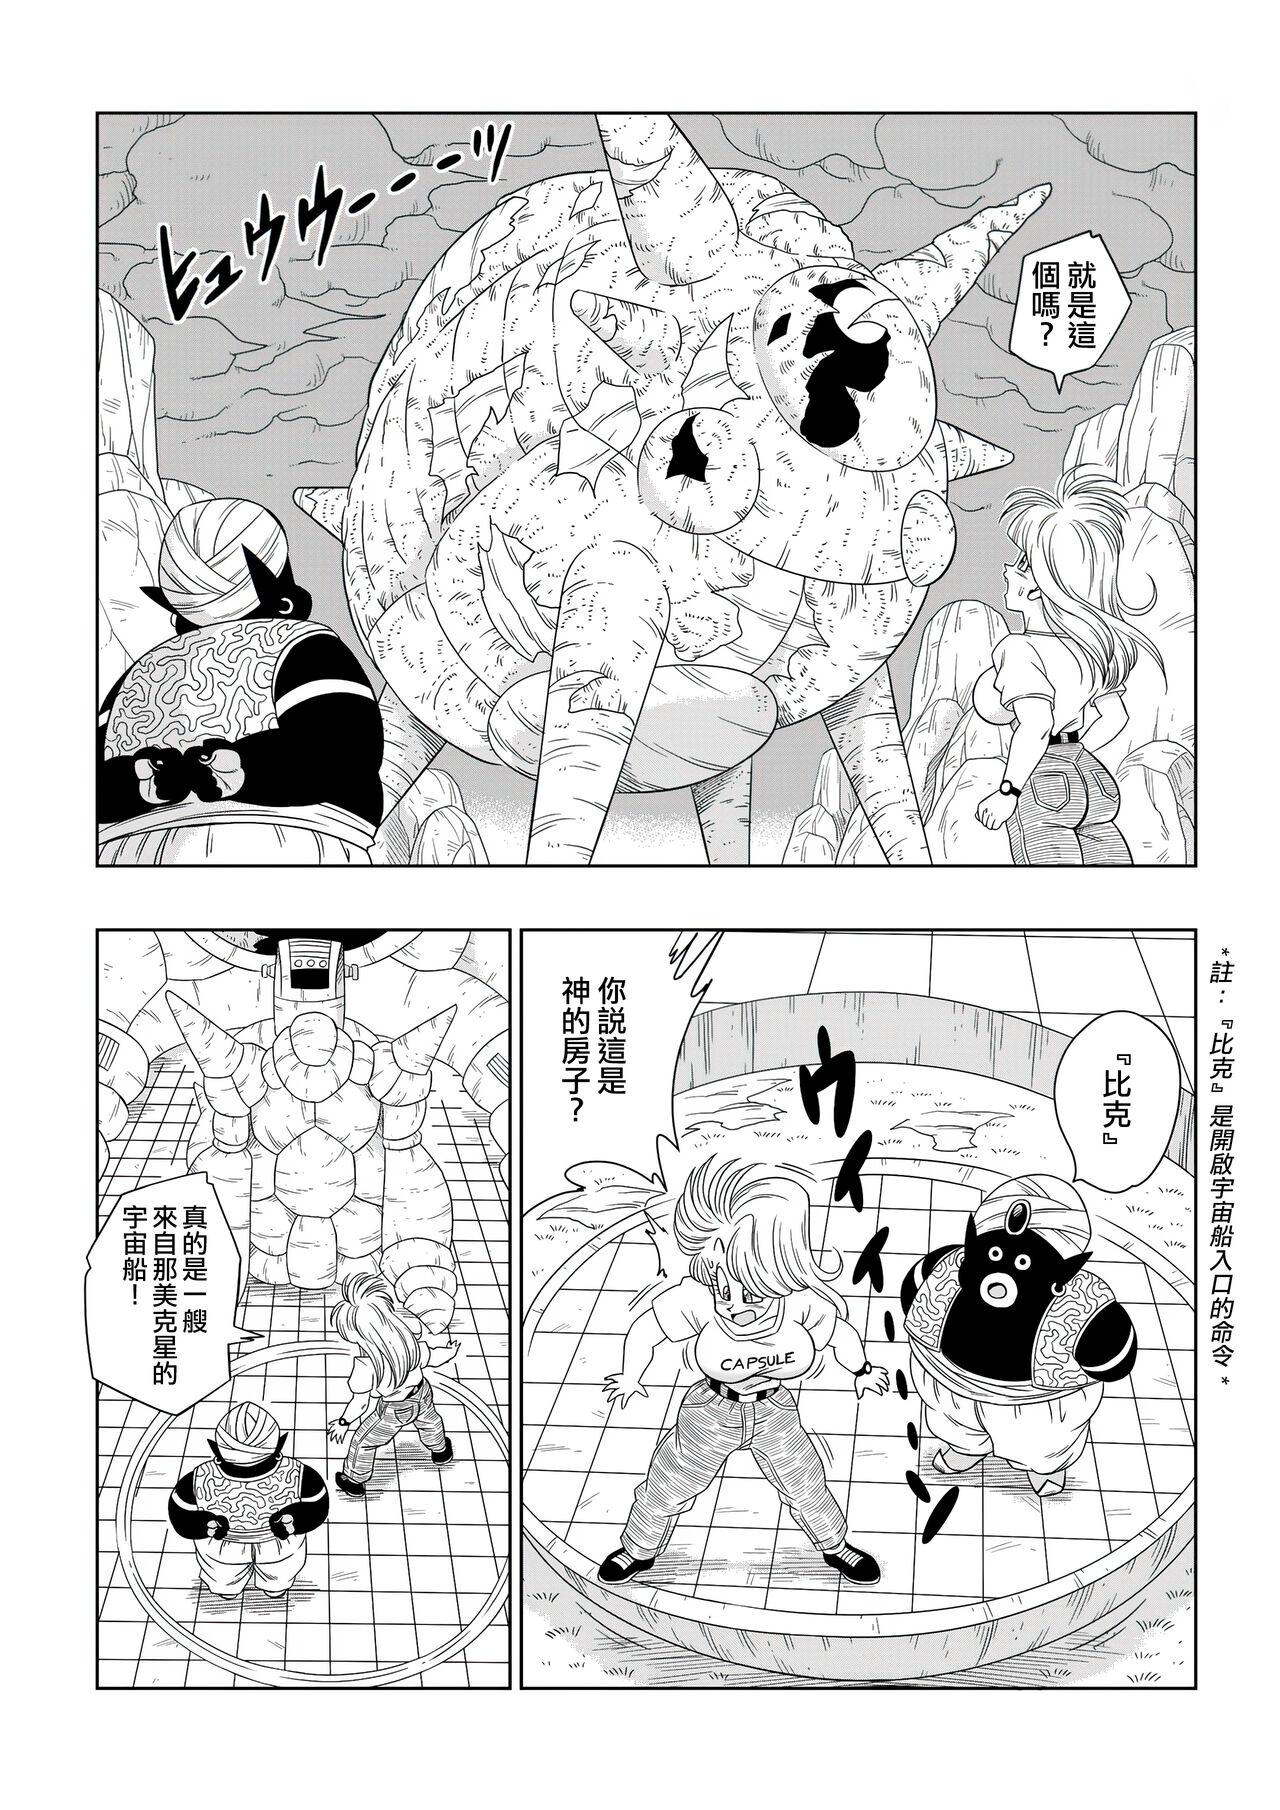 18 Porn Bulma Meets Mr.Popo - Sex inside the Mysterious Spaceship! - Dragon ball z Bigcock - Page 5